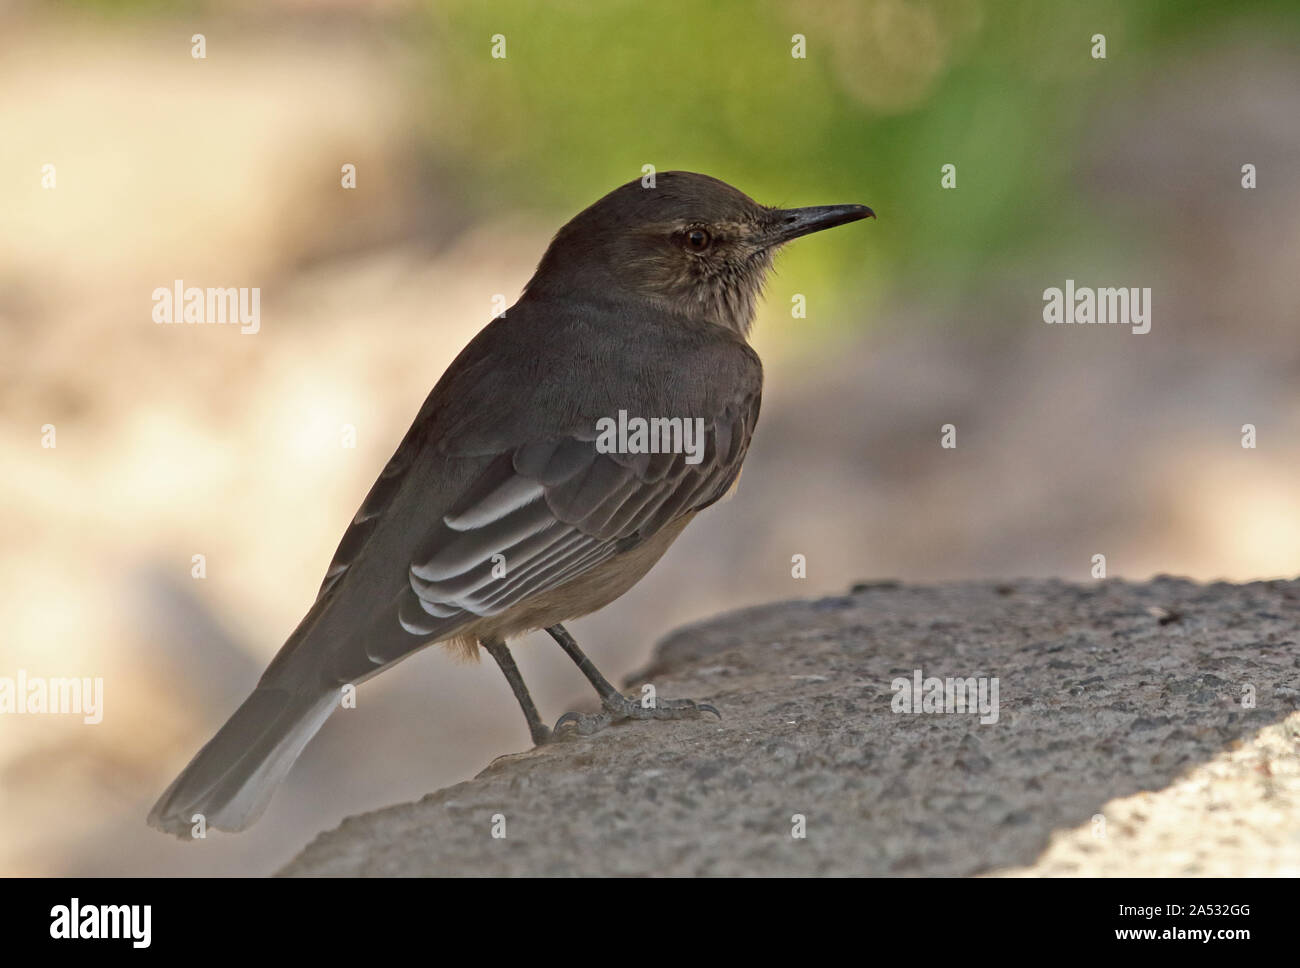 Black-billed Shrike-tyrant (Agriornis montanus maritimus) adult standing on a wall  Farellones, Chile                January Stock Photo